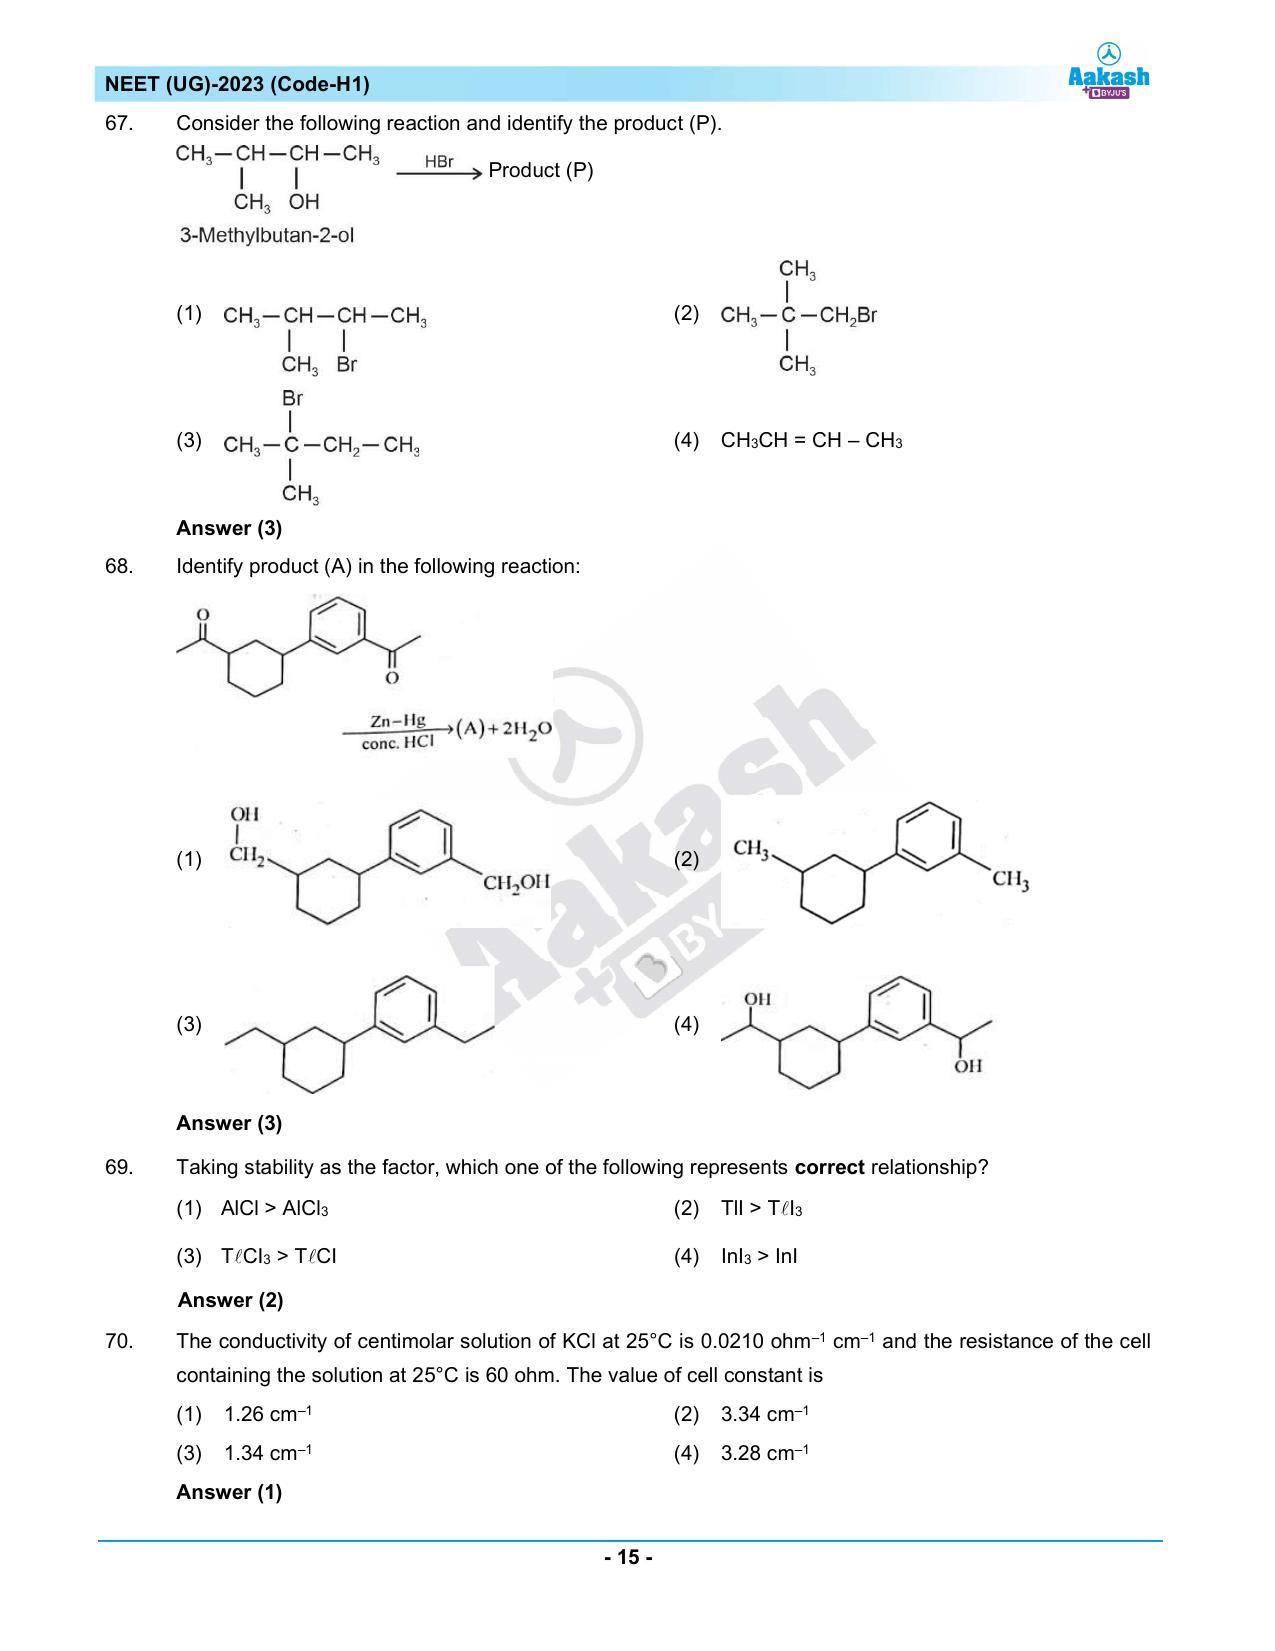 NEET 2023 Question Paper H1 - Page 15